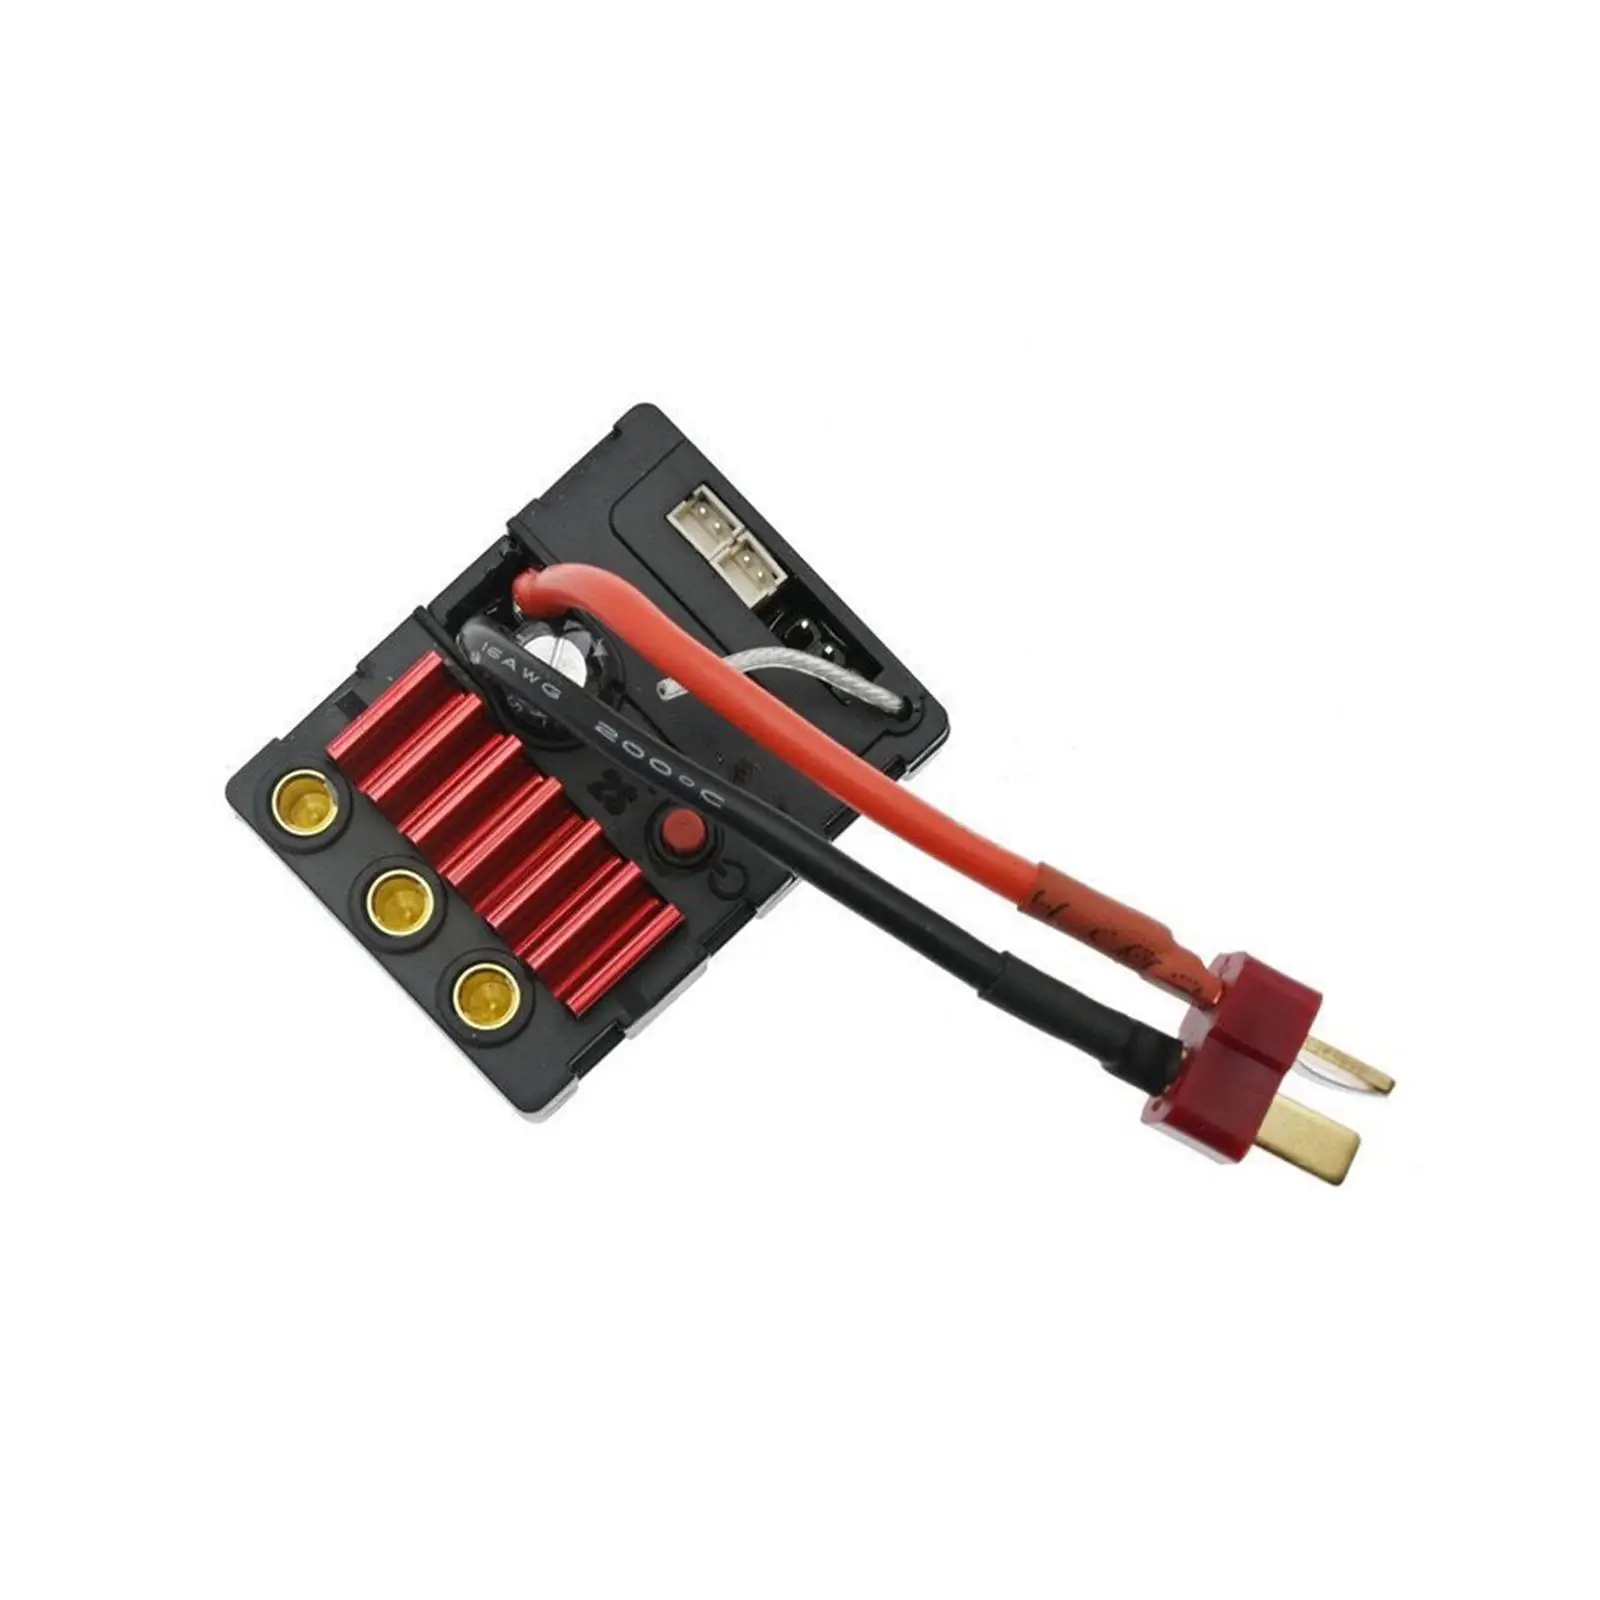 6314 2840 Brushless Motor and 6313 Brushless ESC DIY Parts Sensorless for 1:16 Scale RC Car Vehicle Hobby Car Model Spare Parts